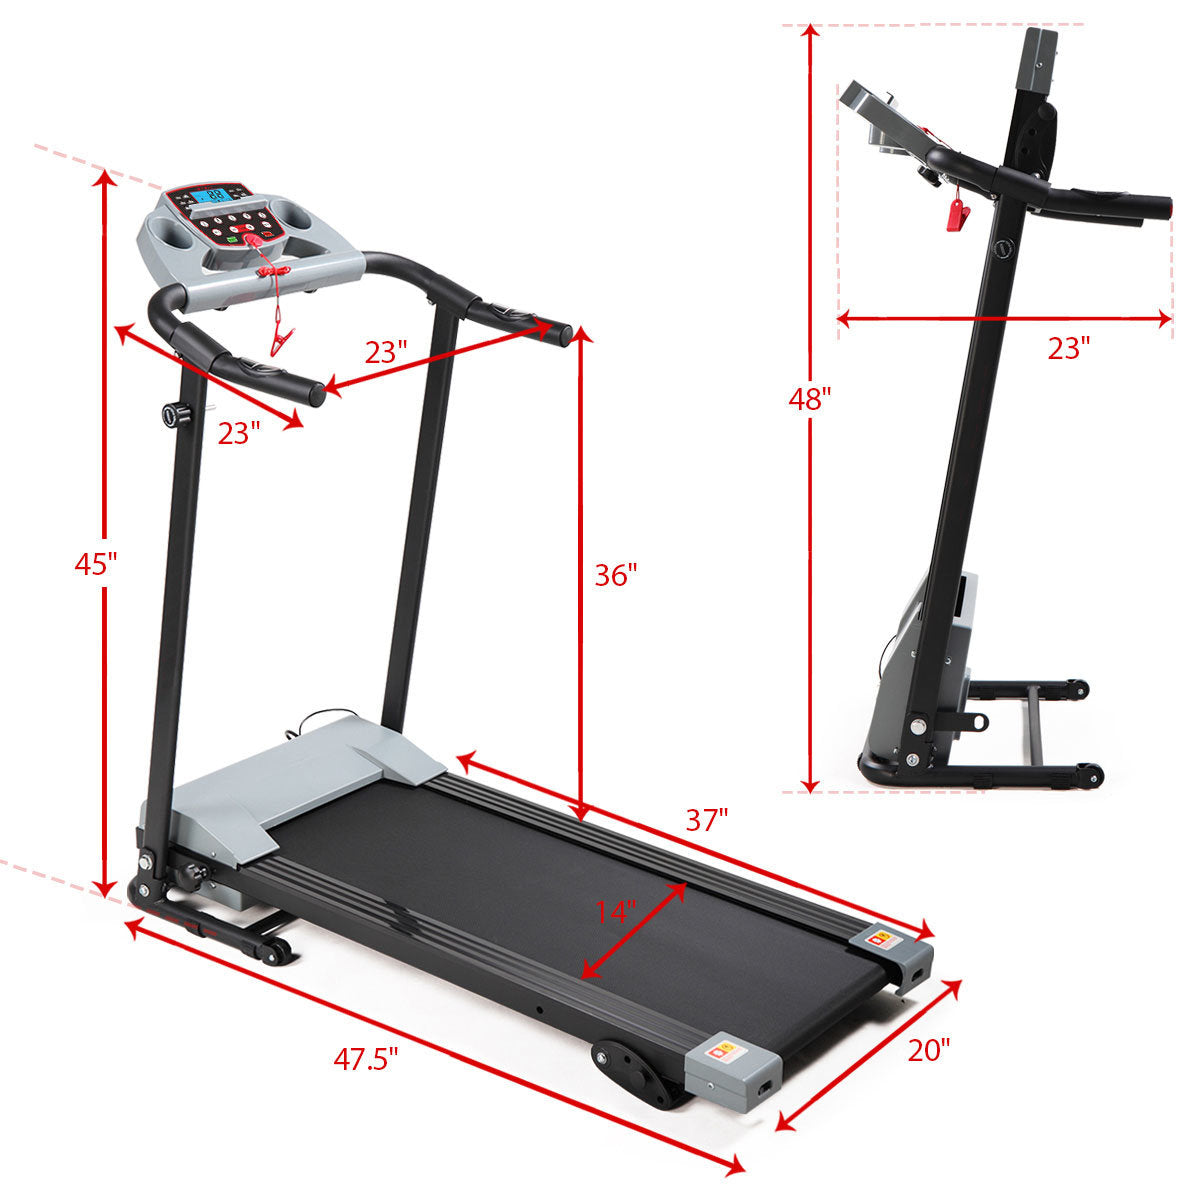 Folding Electric Treadmill for Home Workout with LCD monitors track calories, distance, speed, heart rate, walk/run time and more XH